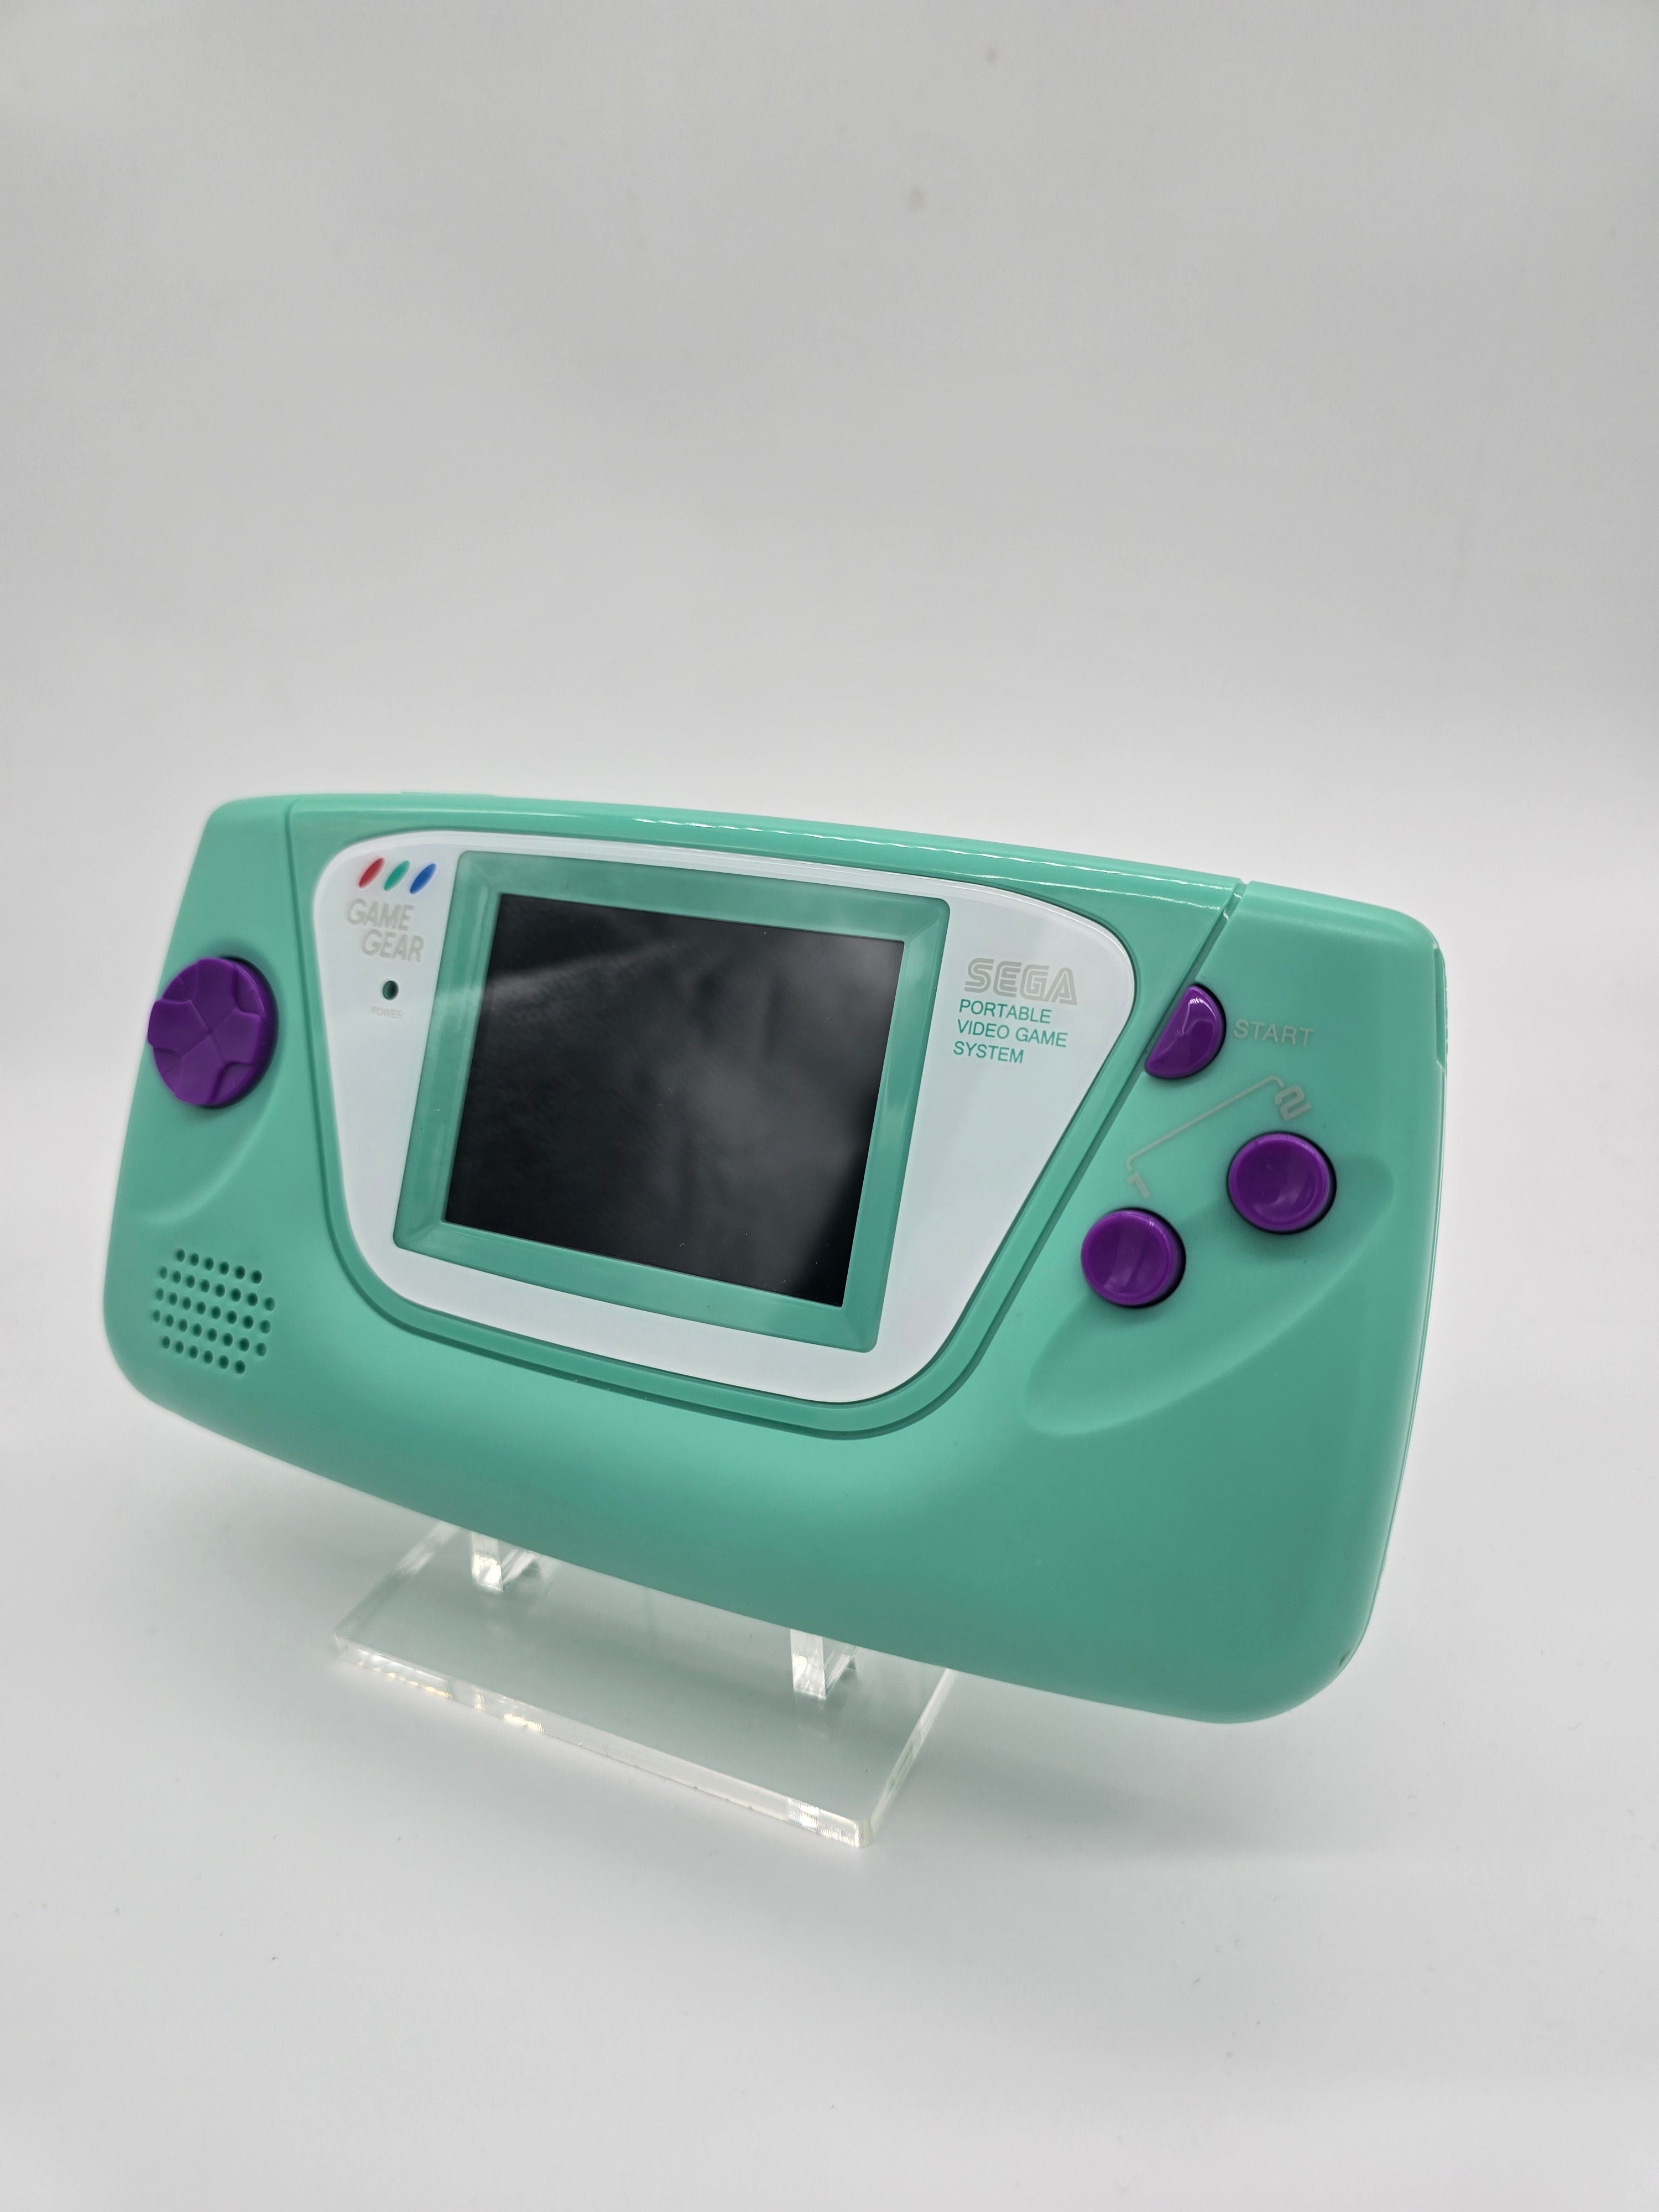 Re-Shelled Sega Game Gear Handheld Console